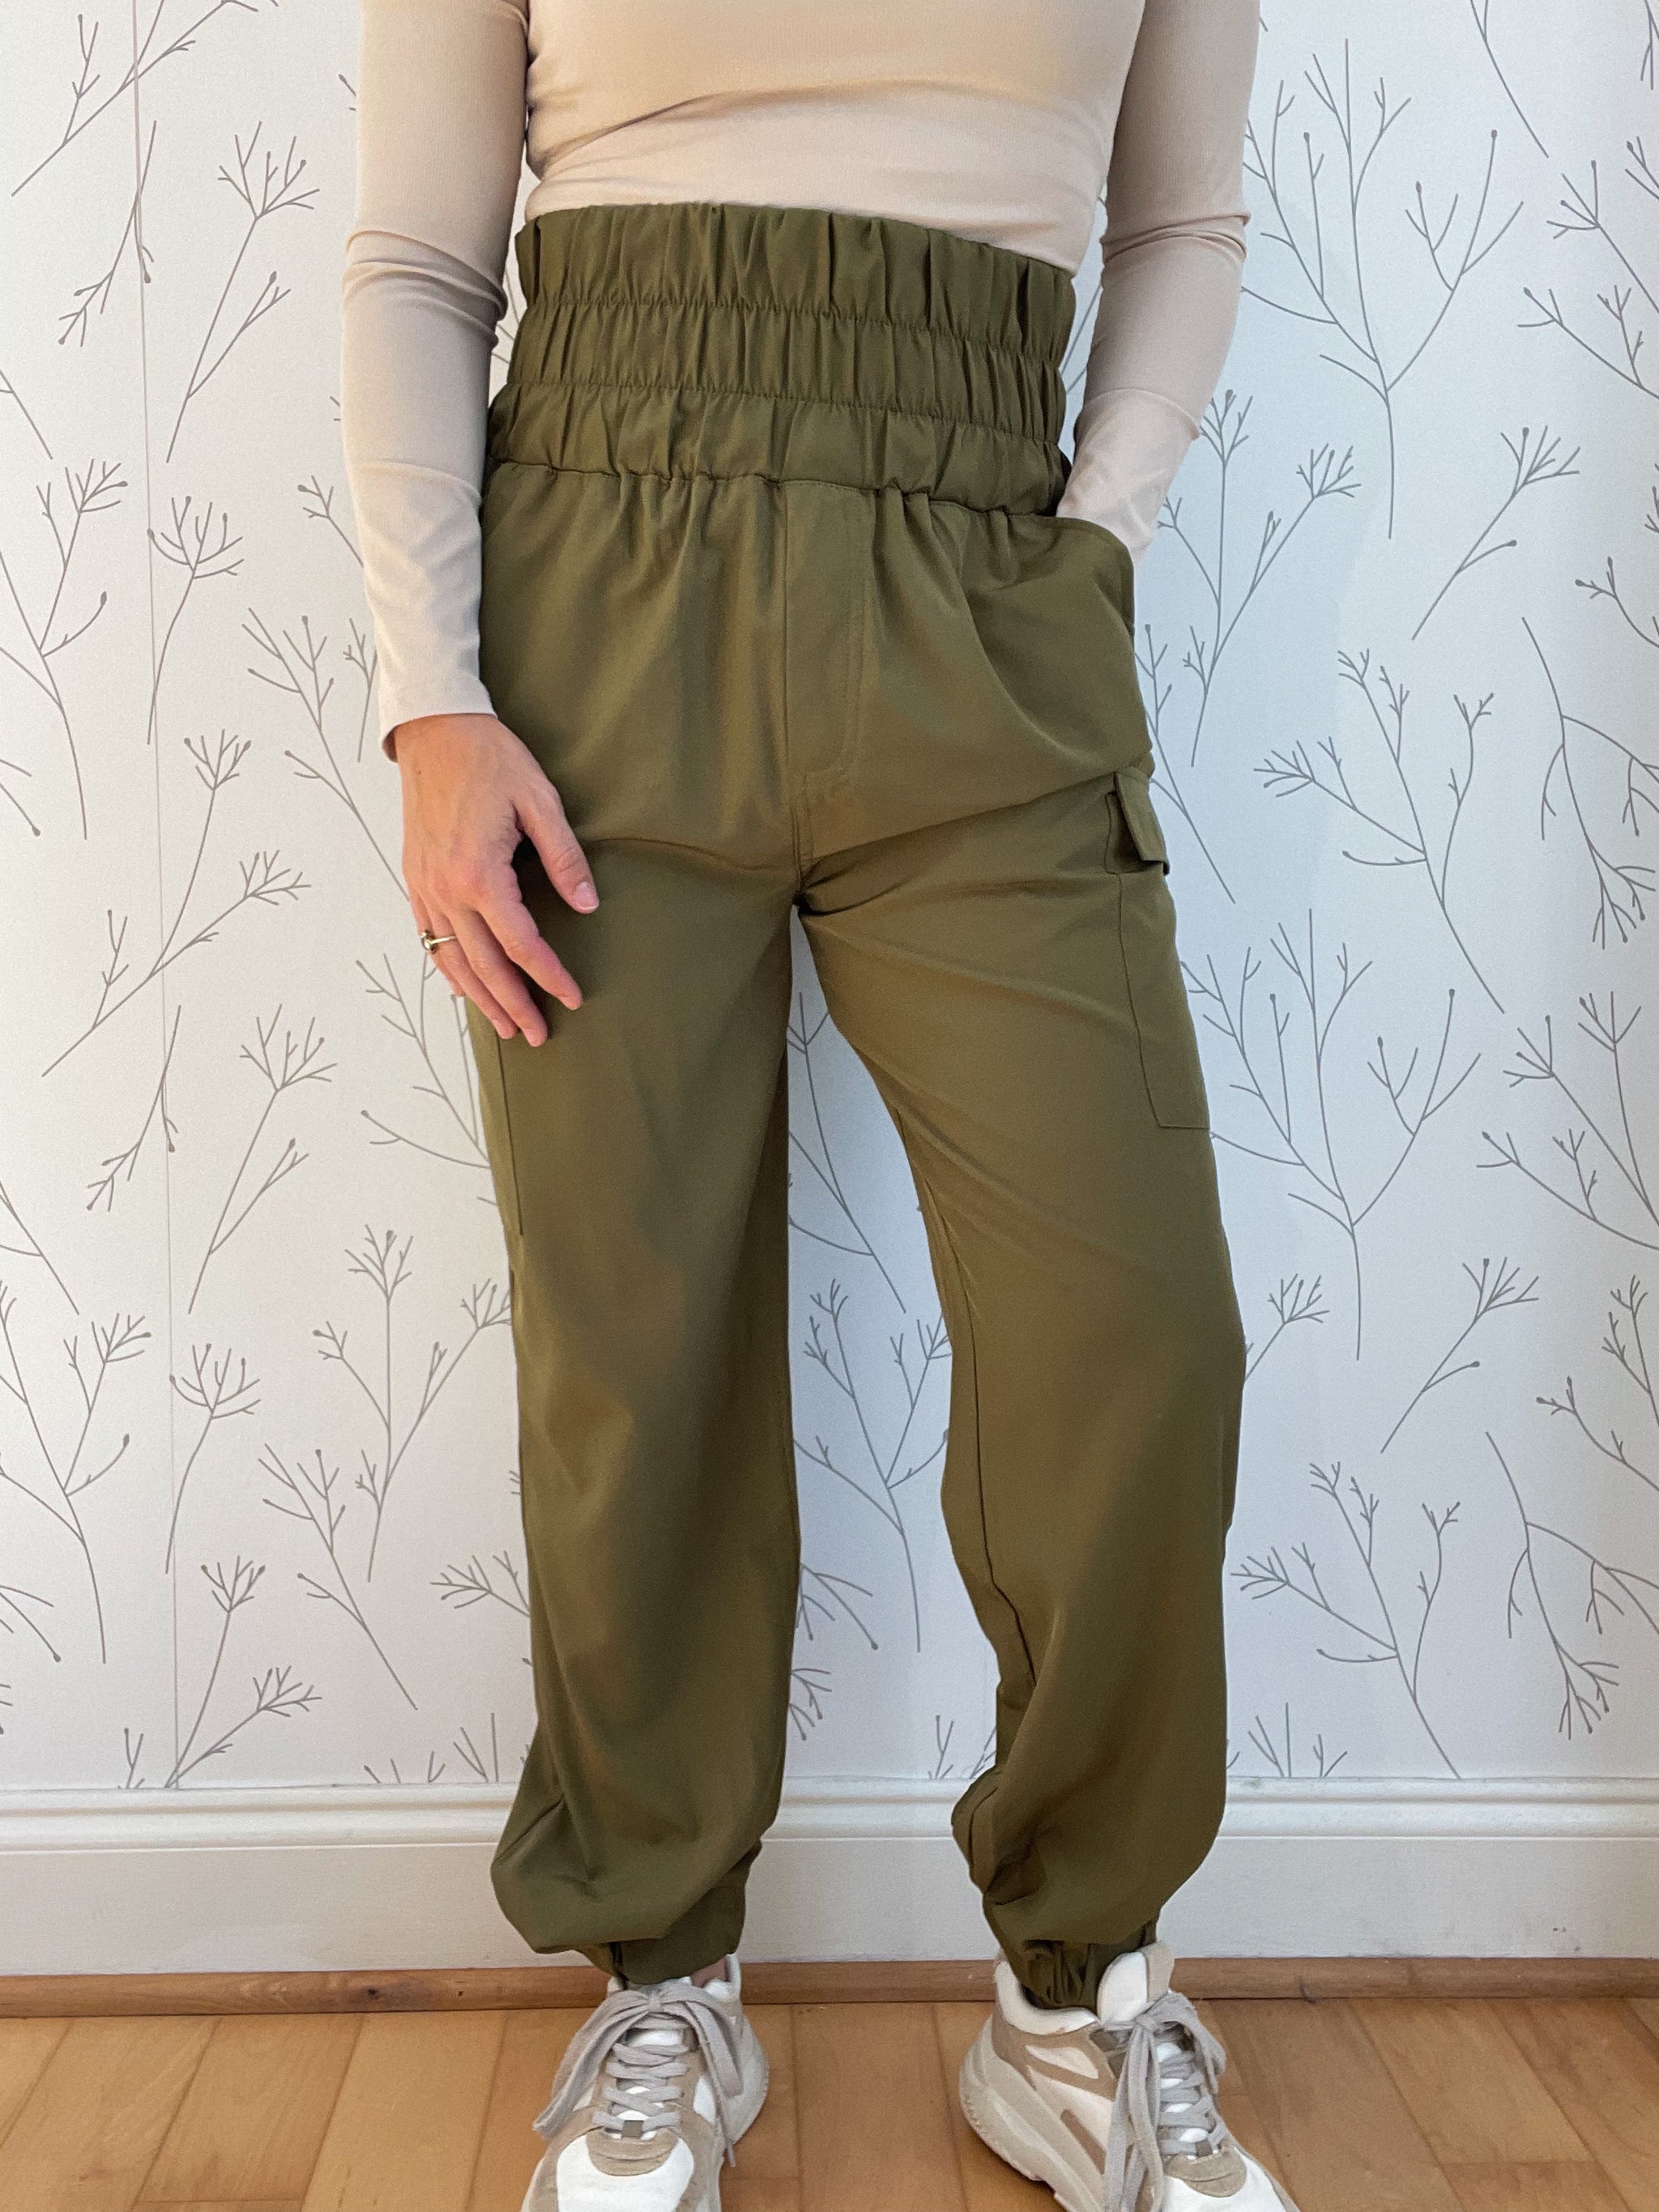 Women's Cargo Pants | Explore our New Arrivals | ZARA United States